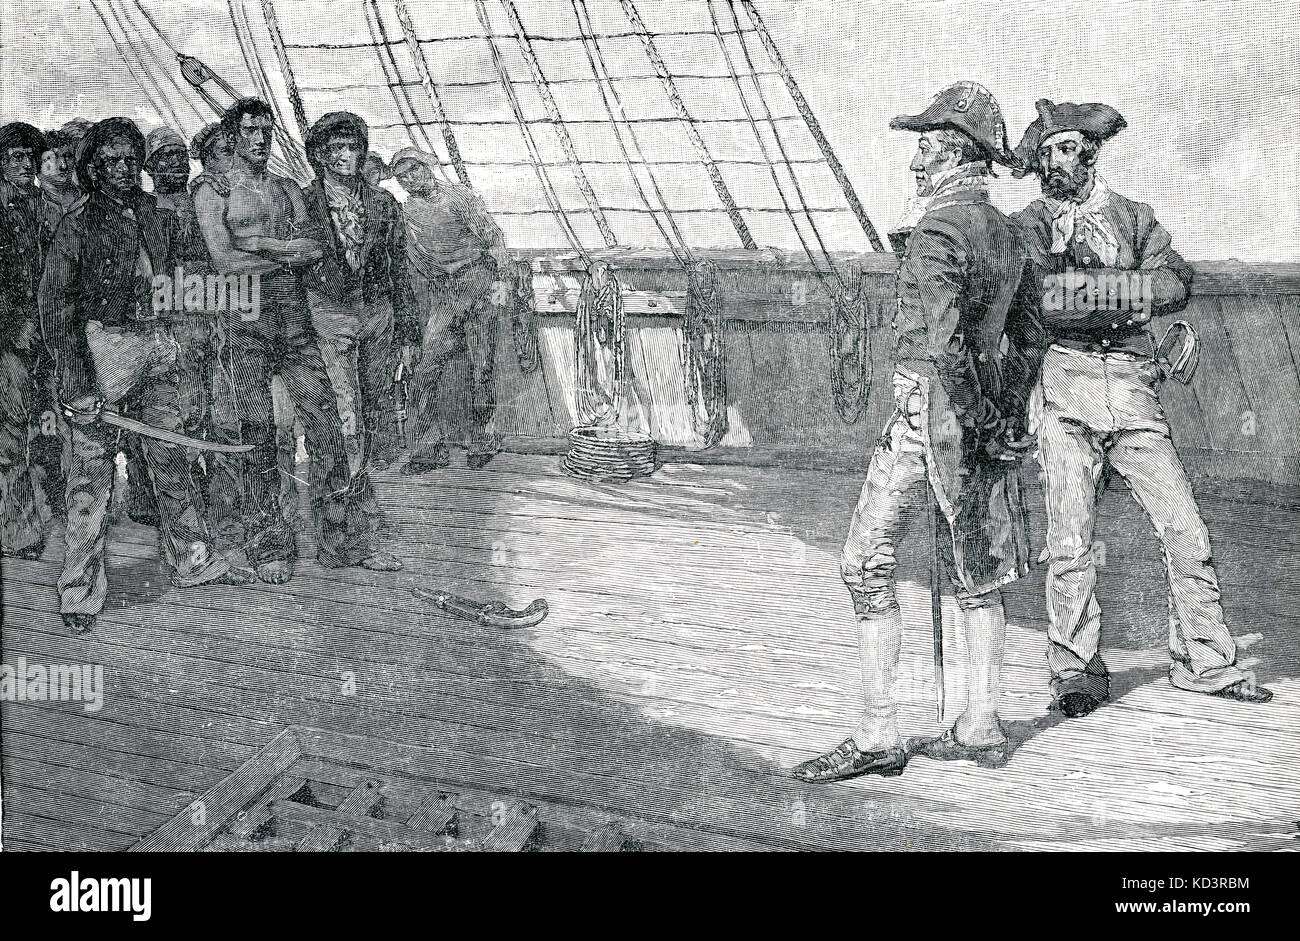 Impressment of American Seamen, Second War for Independence / War of 1812. Illustration by Howard Pyle, 1884 Stock Photo